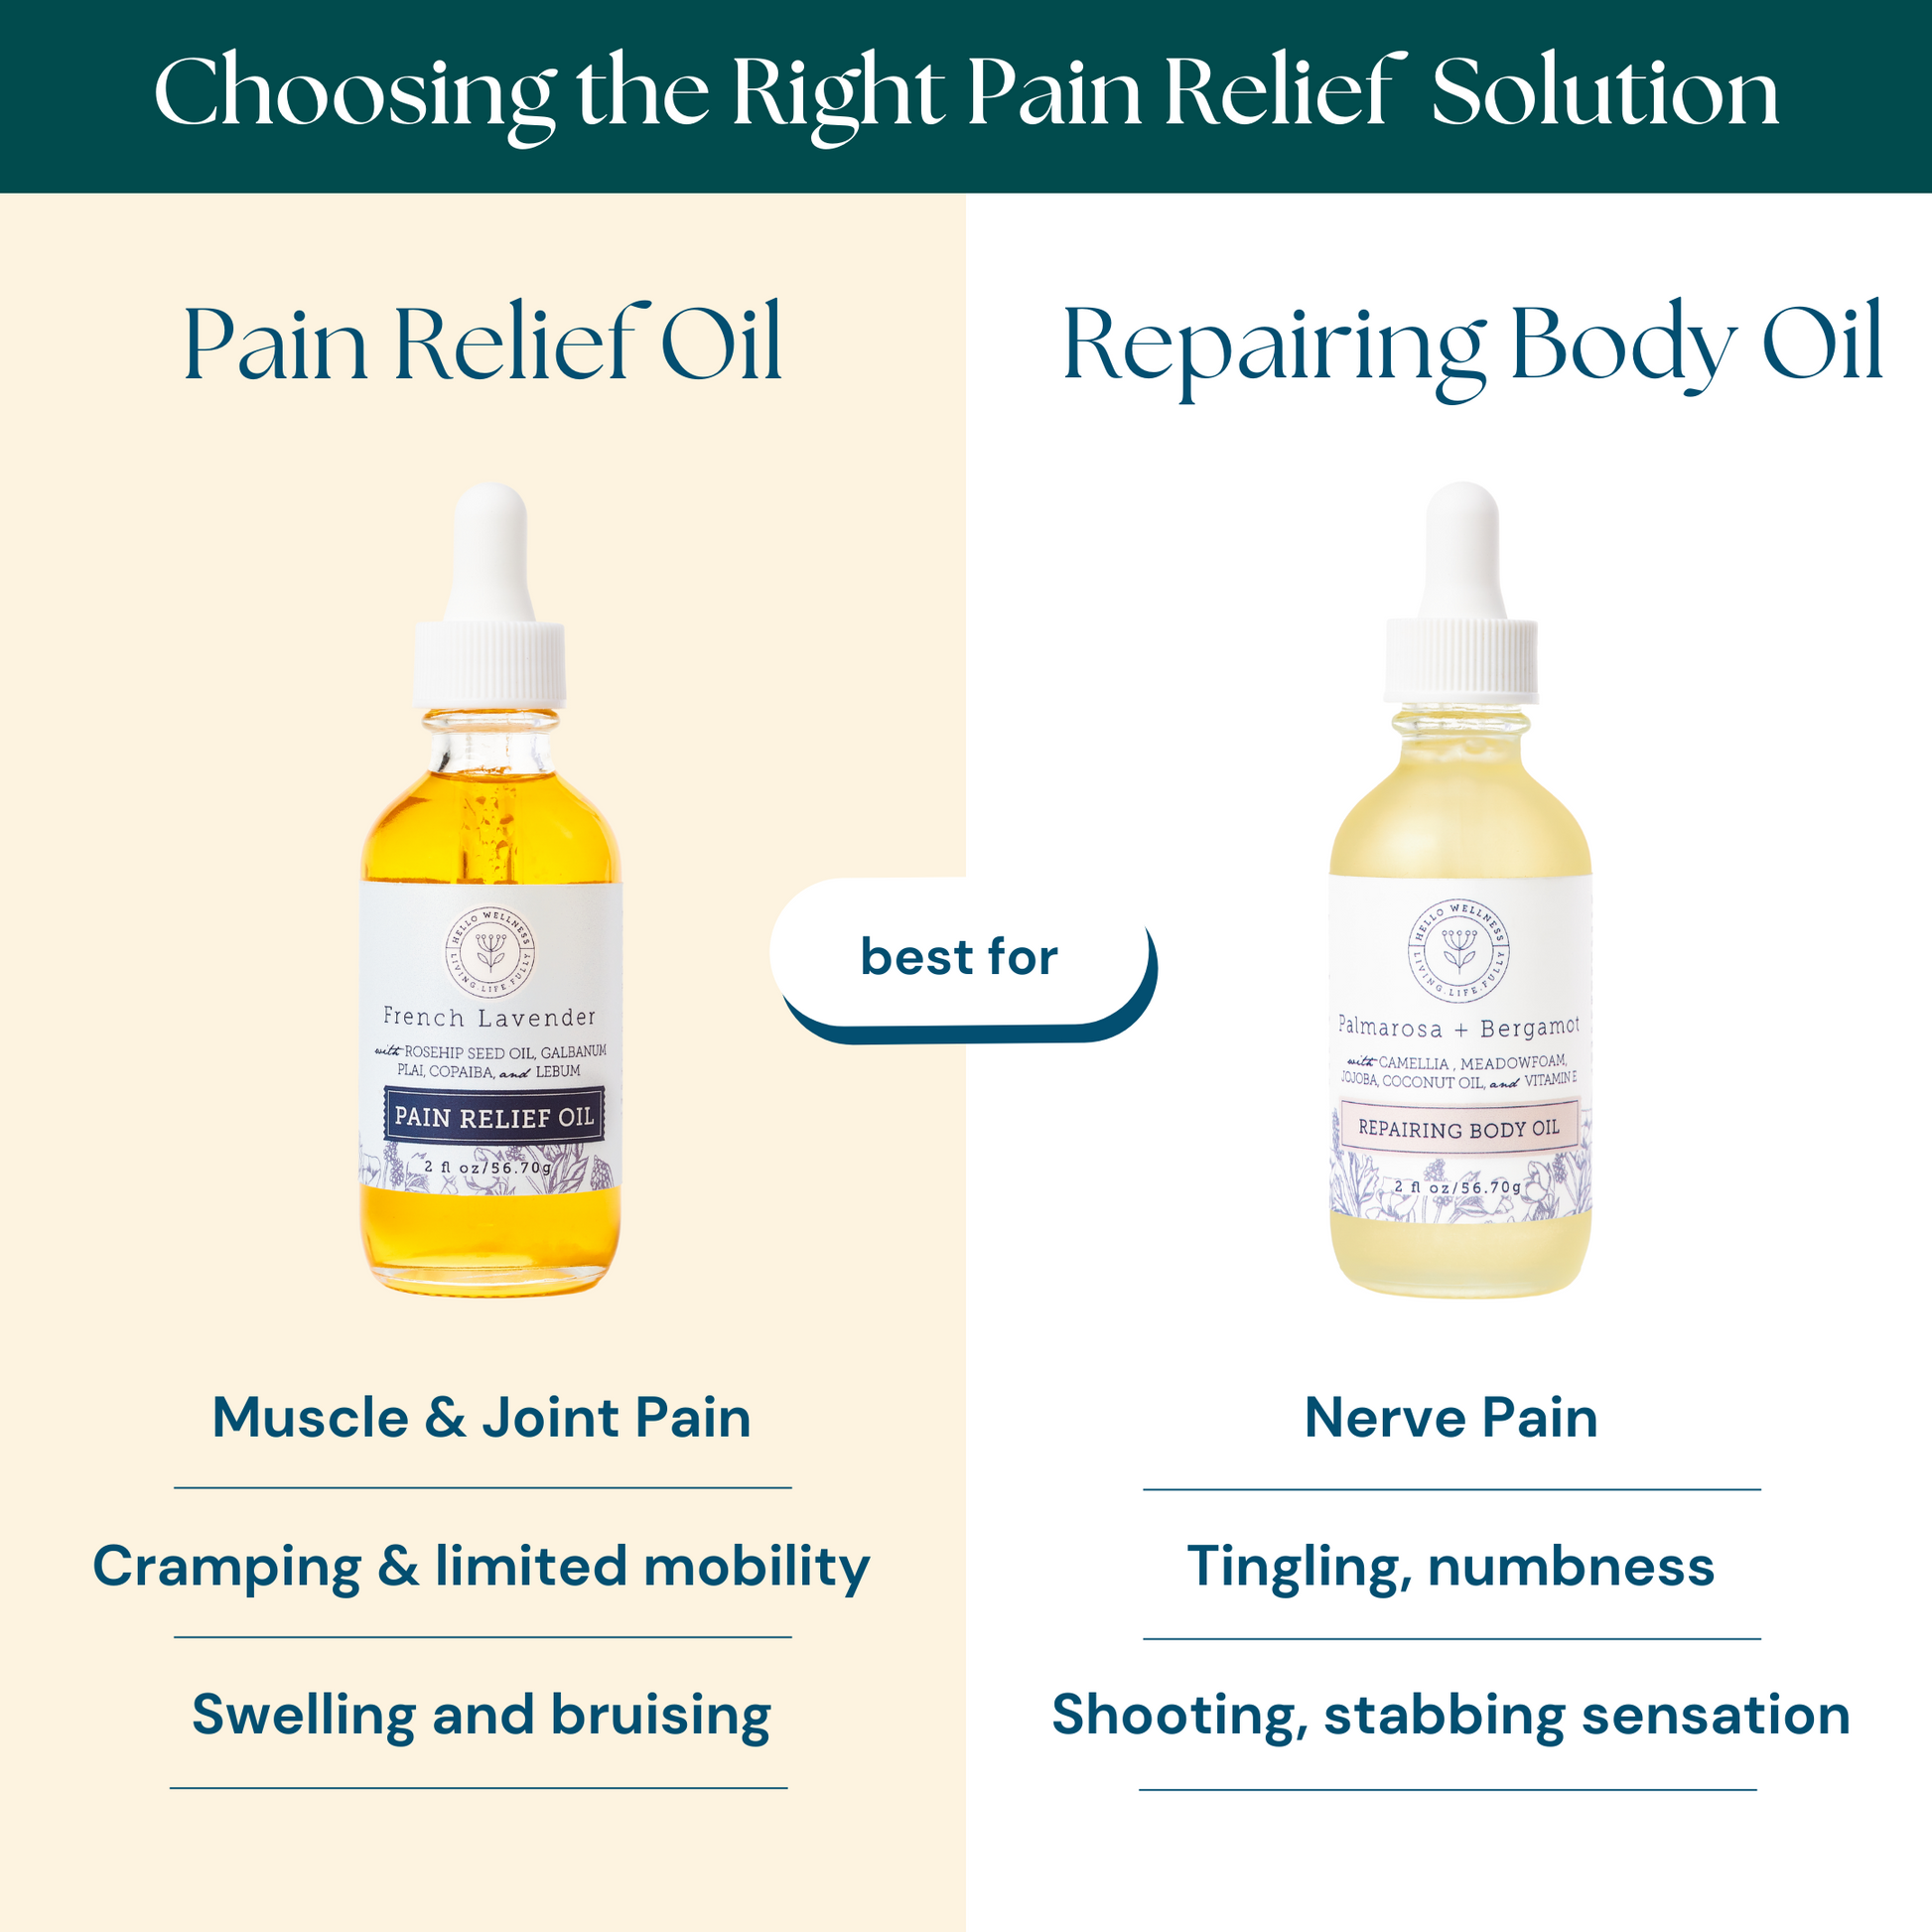 Pain Relief oil for Muscle & Joint Pain or Repairing Body Oil for Nerve Pain